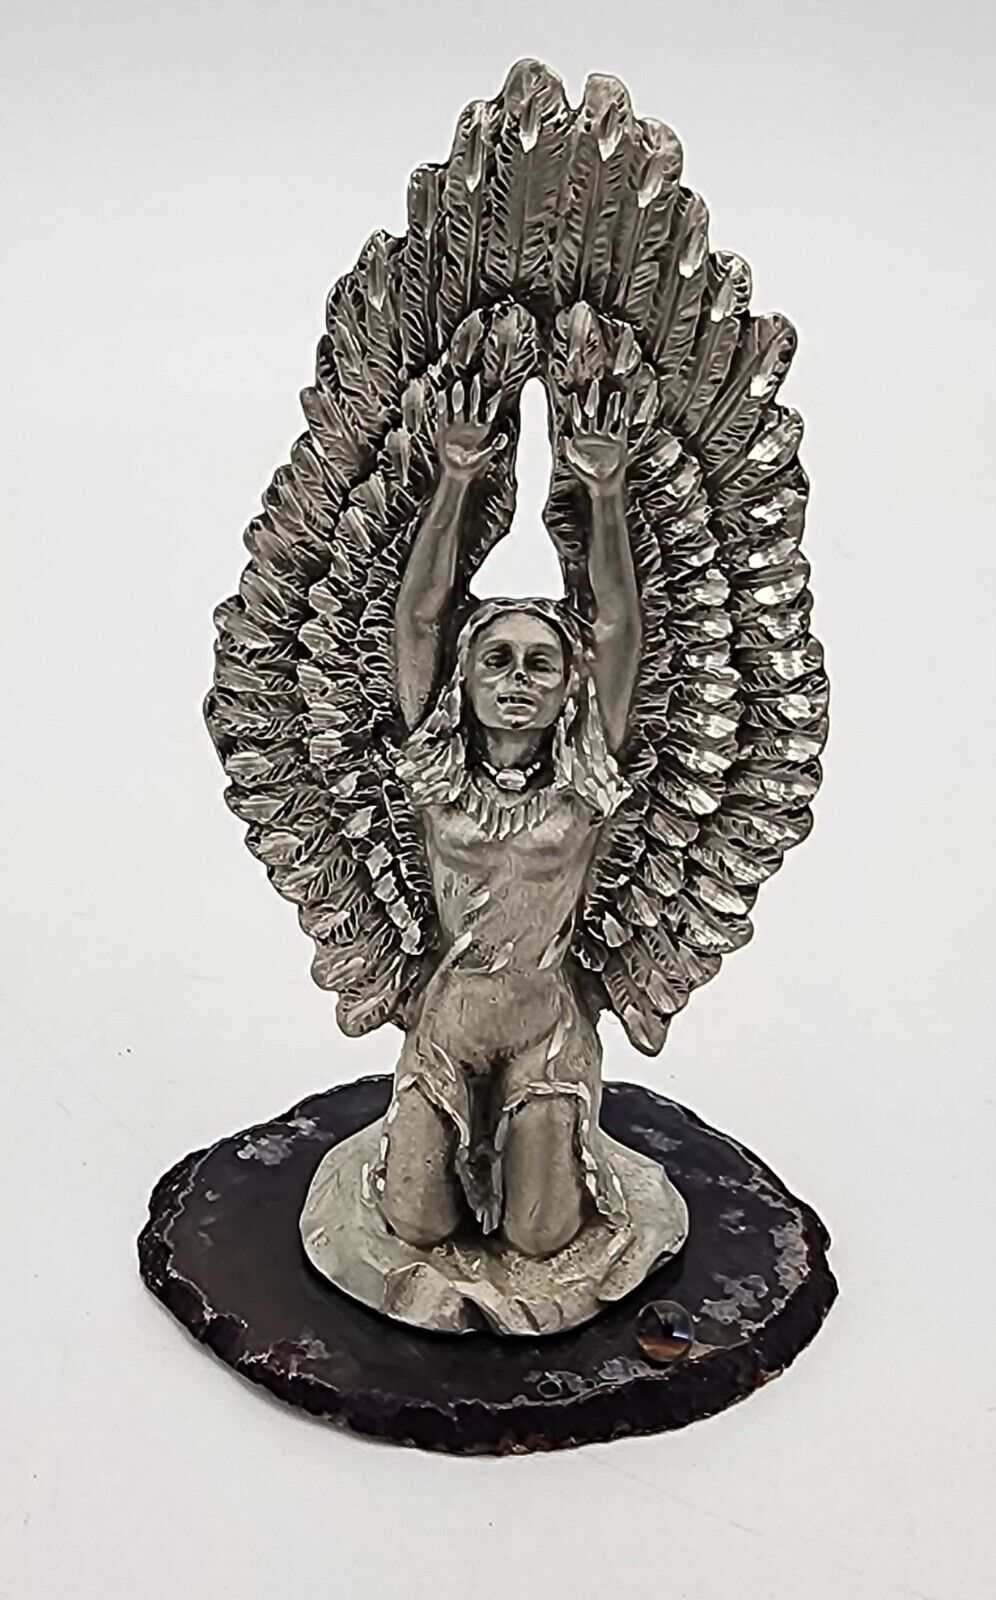 Vintage Native American Woman Statue Made Of Pewter